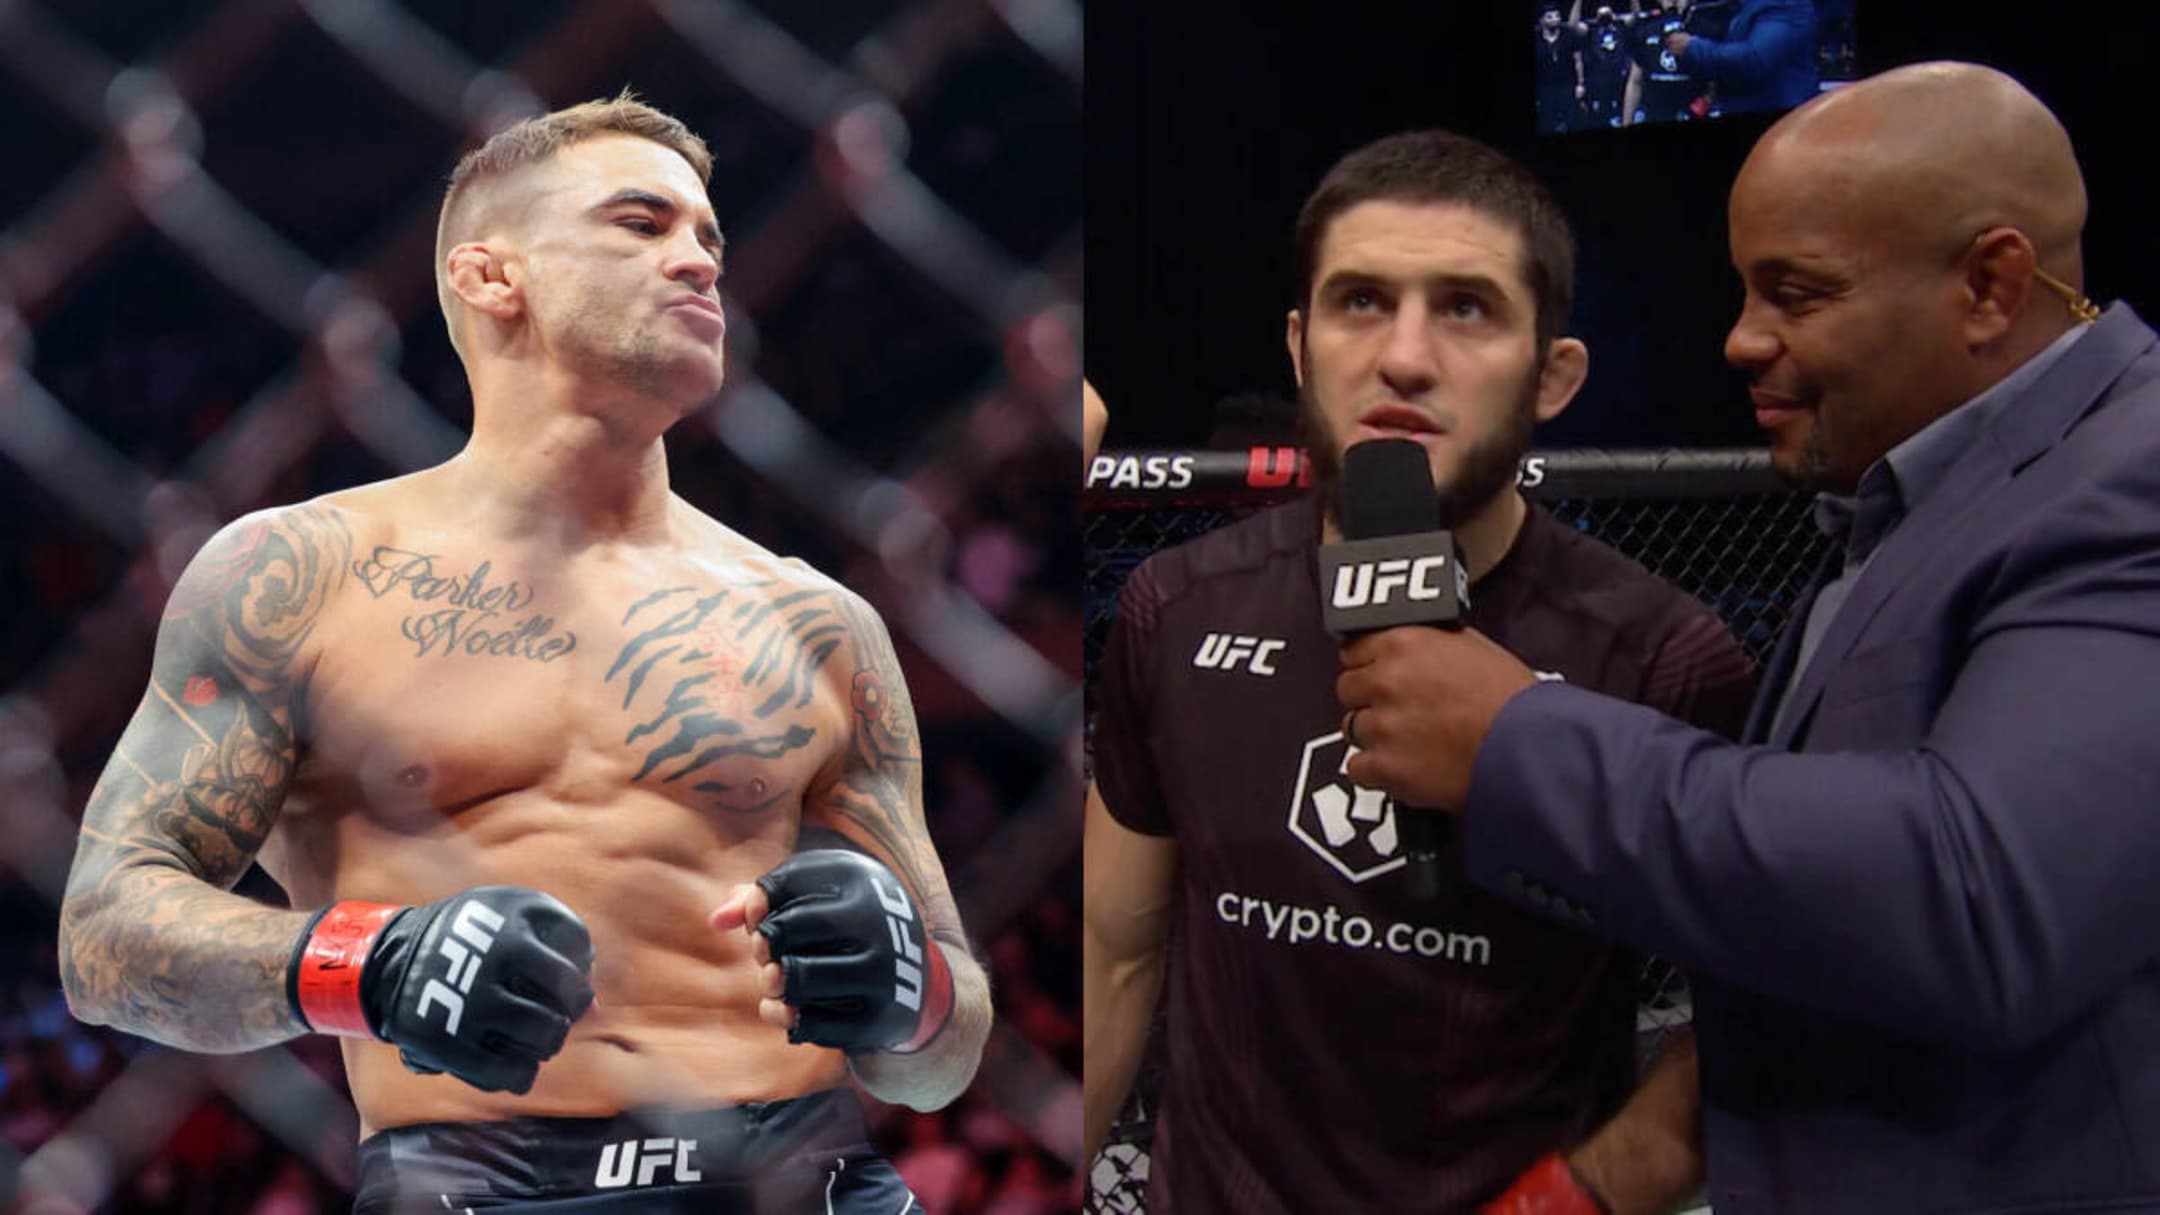 You gotta pay your dues - Dustin Poirier explains why he agreed